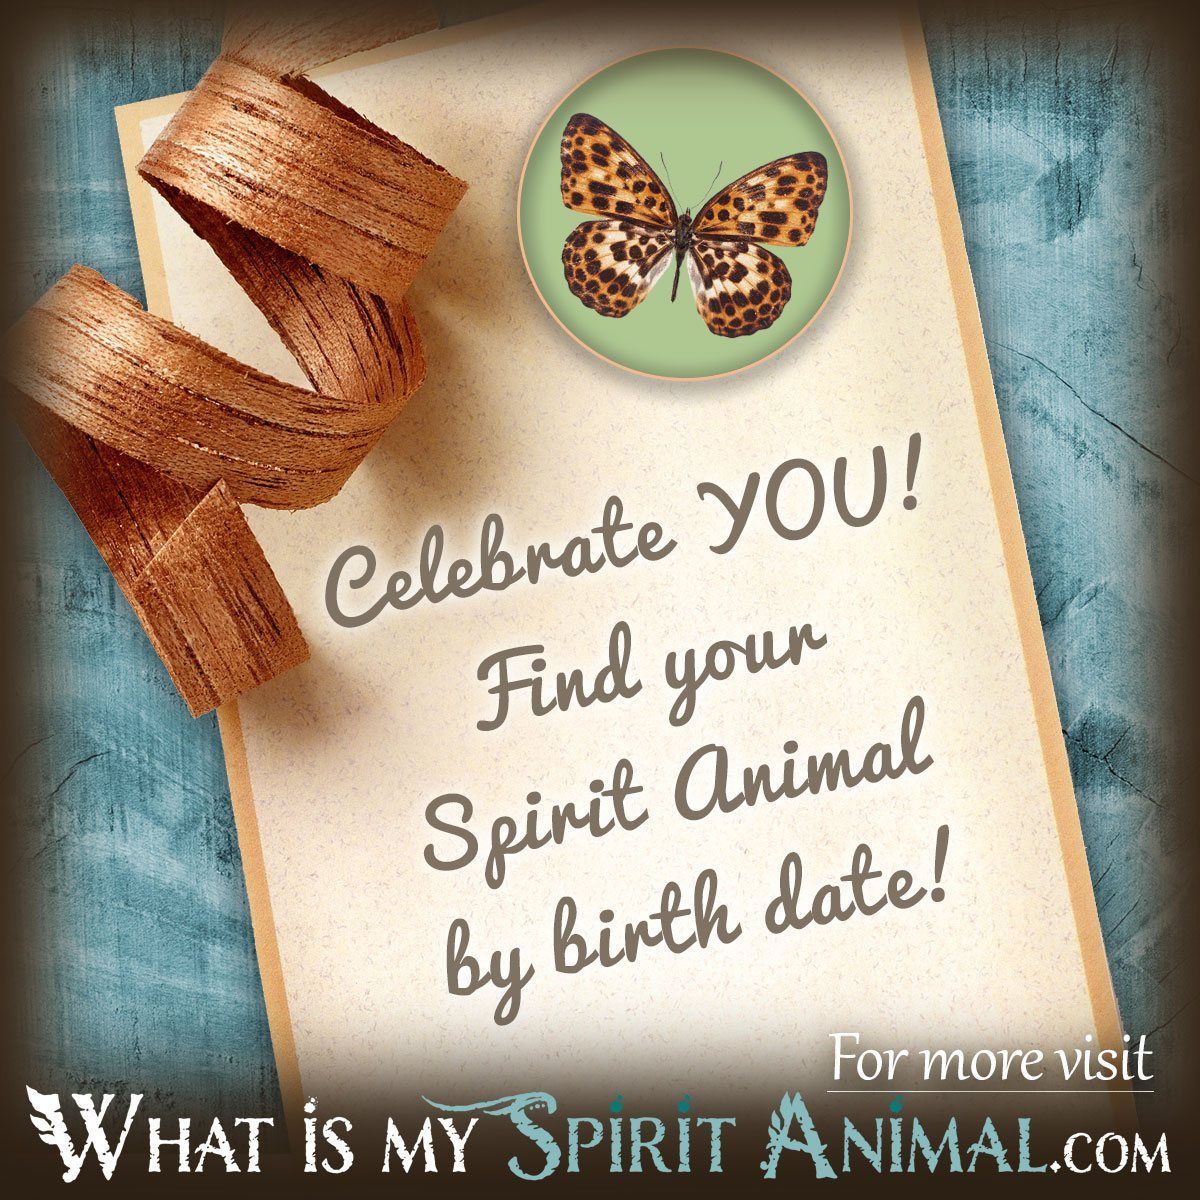 What Is My Spirit Animal by Birthday 1200x1200